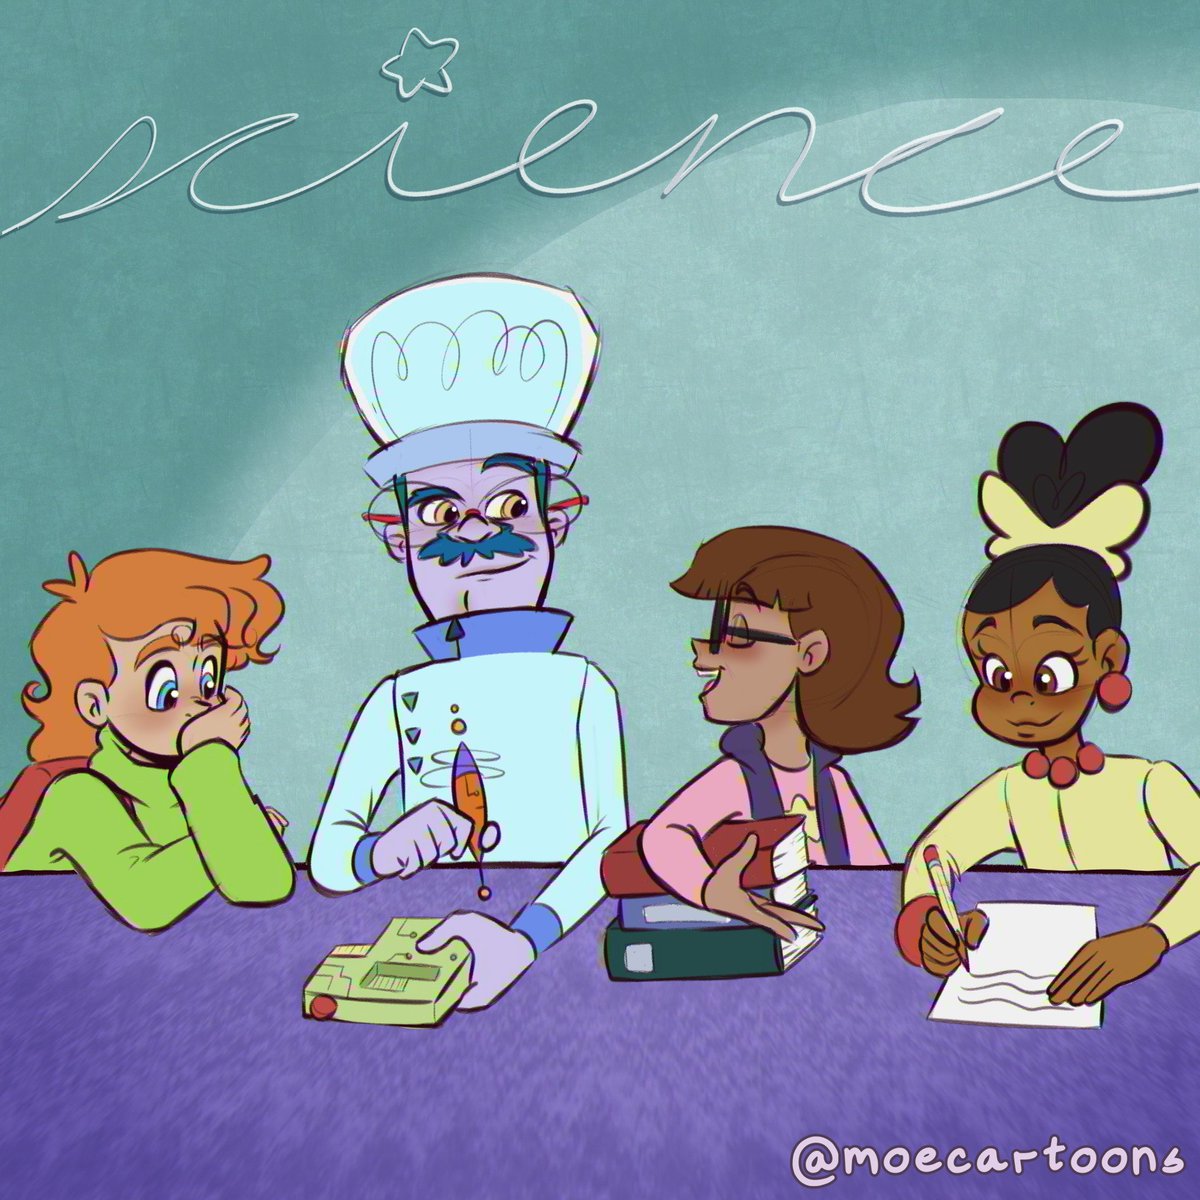 My second piece for Cyberweek celebrating Cyberchase's anniversary with the prompt Science, I just wanted to draw Dr marbles again and with the trio